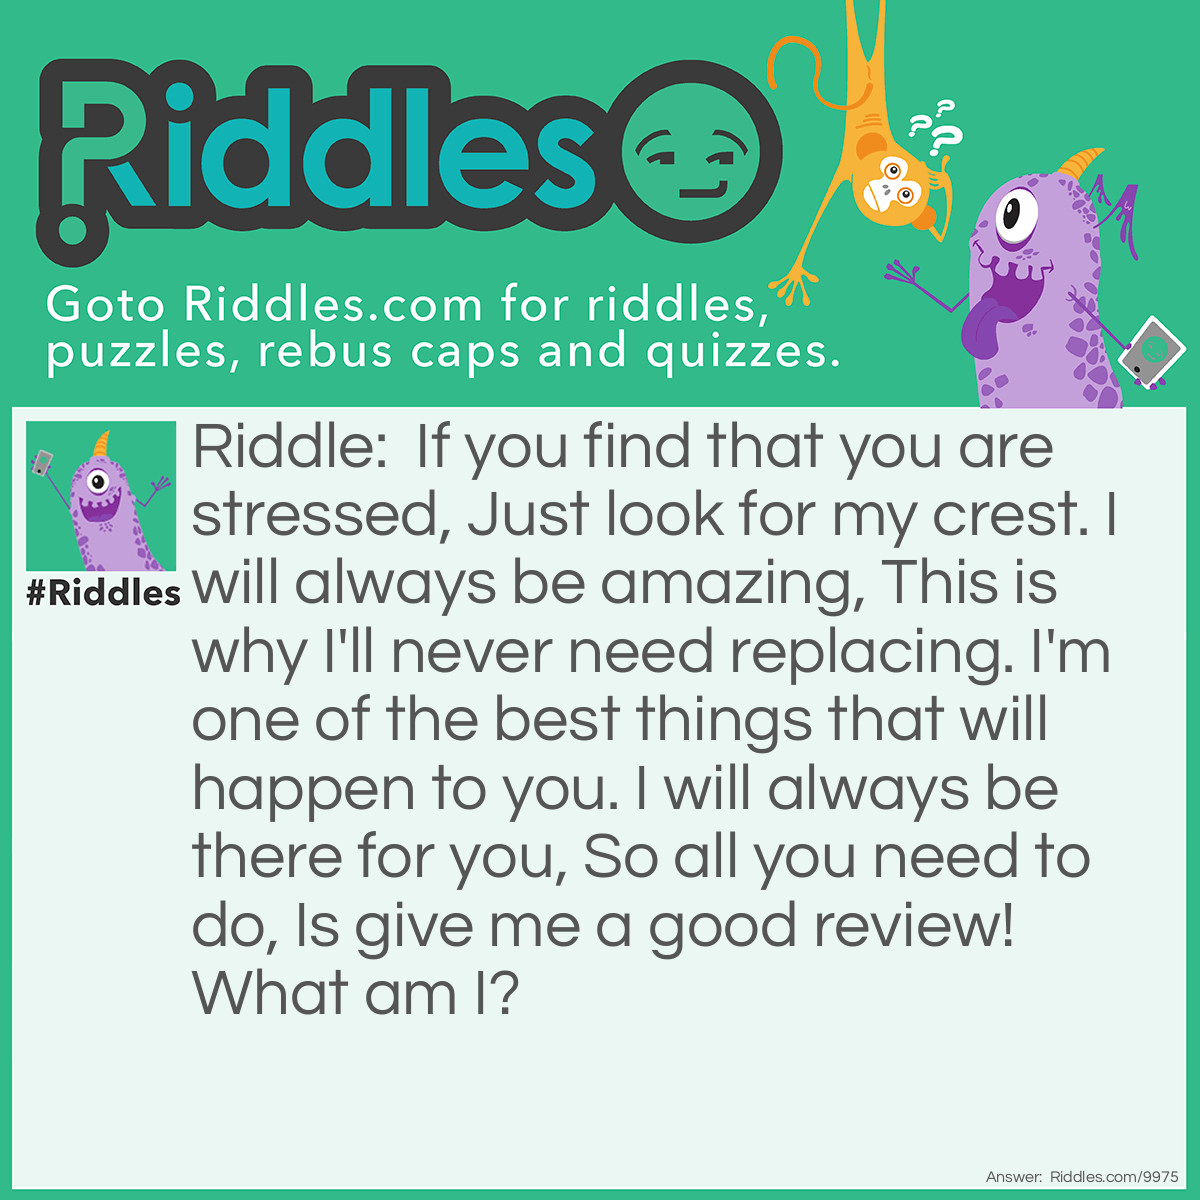 Riddle: If you find that you are stressed, Just look for my crest. I will always be amazing, This is why I'll never need replacing. I'm one of the best things that will happen to you. I will always be there for you, So all you need to do, Is give me a good review! What am I? Answer: I'm ?Riddles!!!!